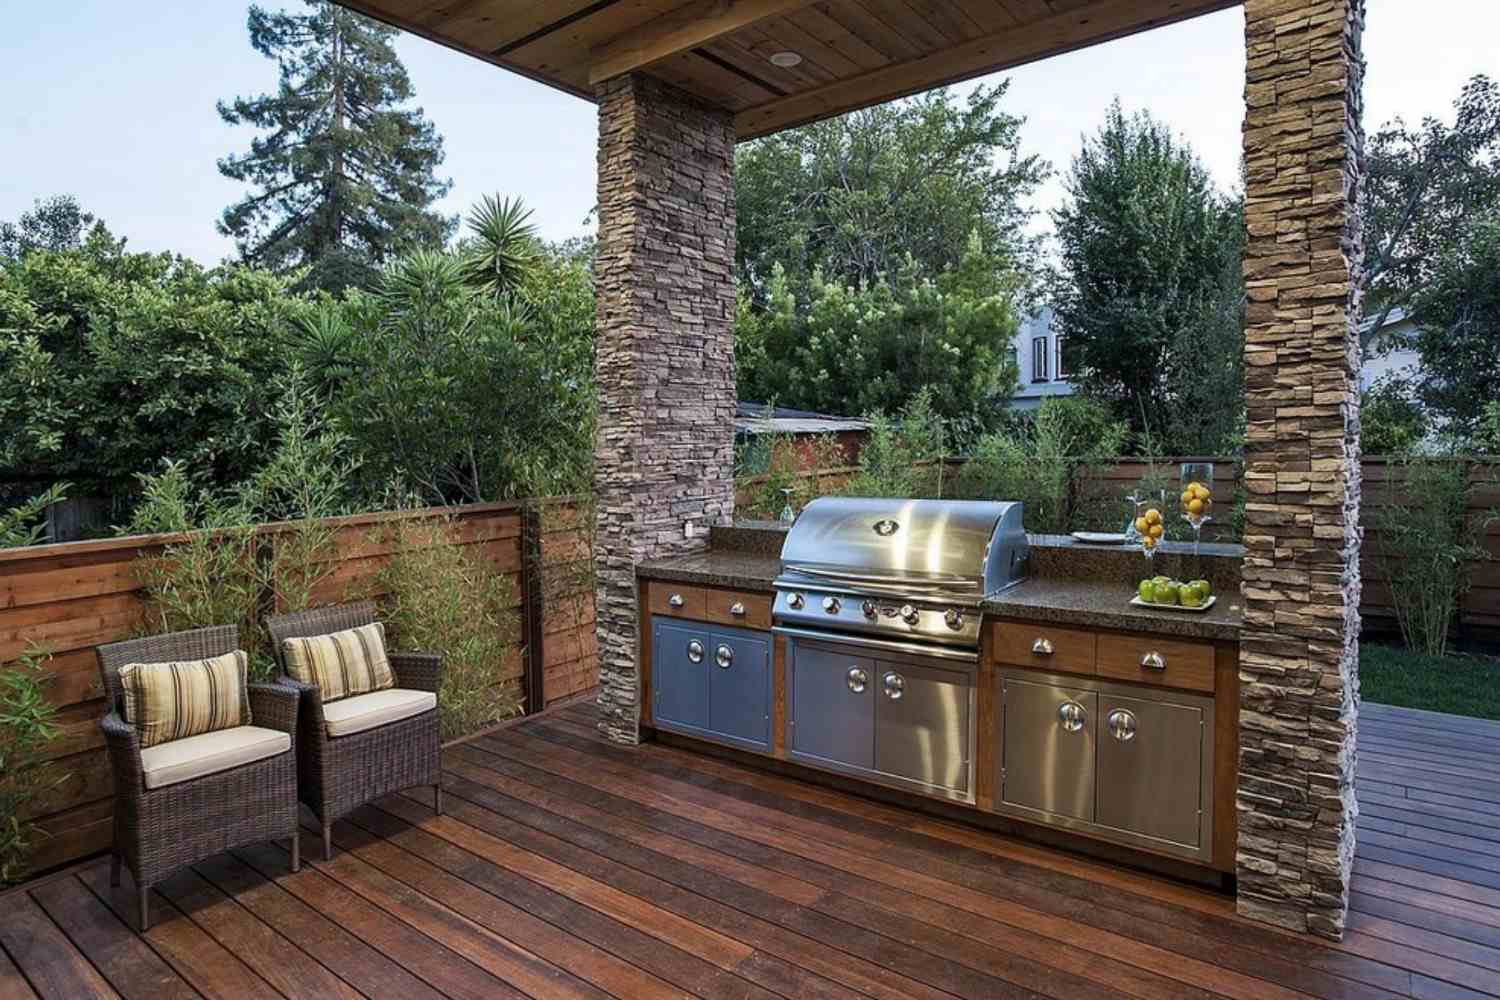 Positives and Negatives of an Outdoor Kitchen